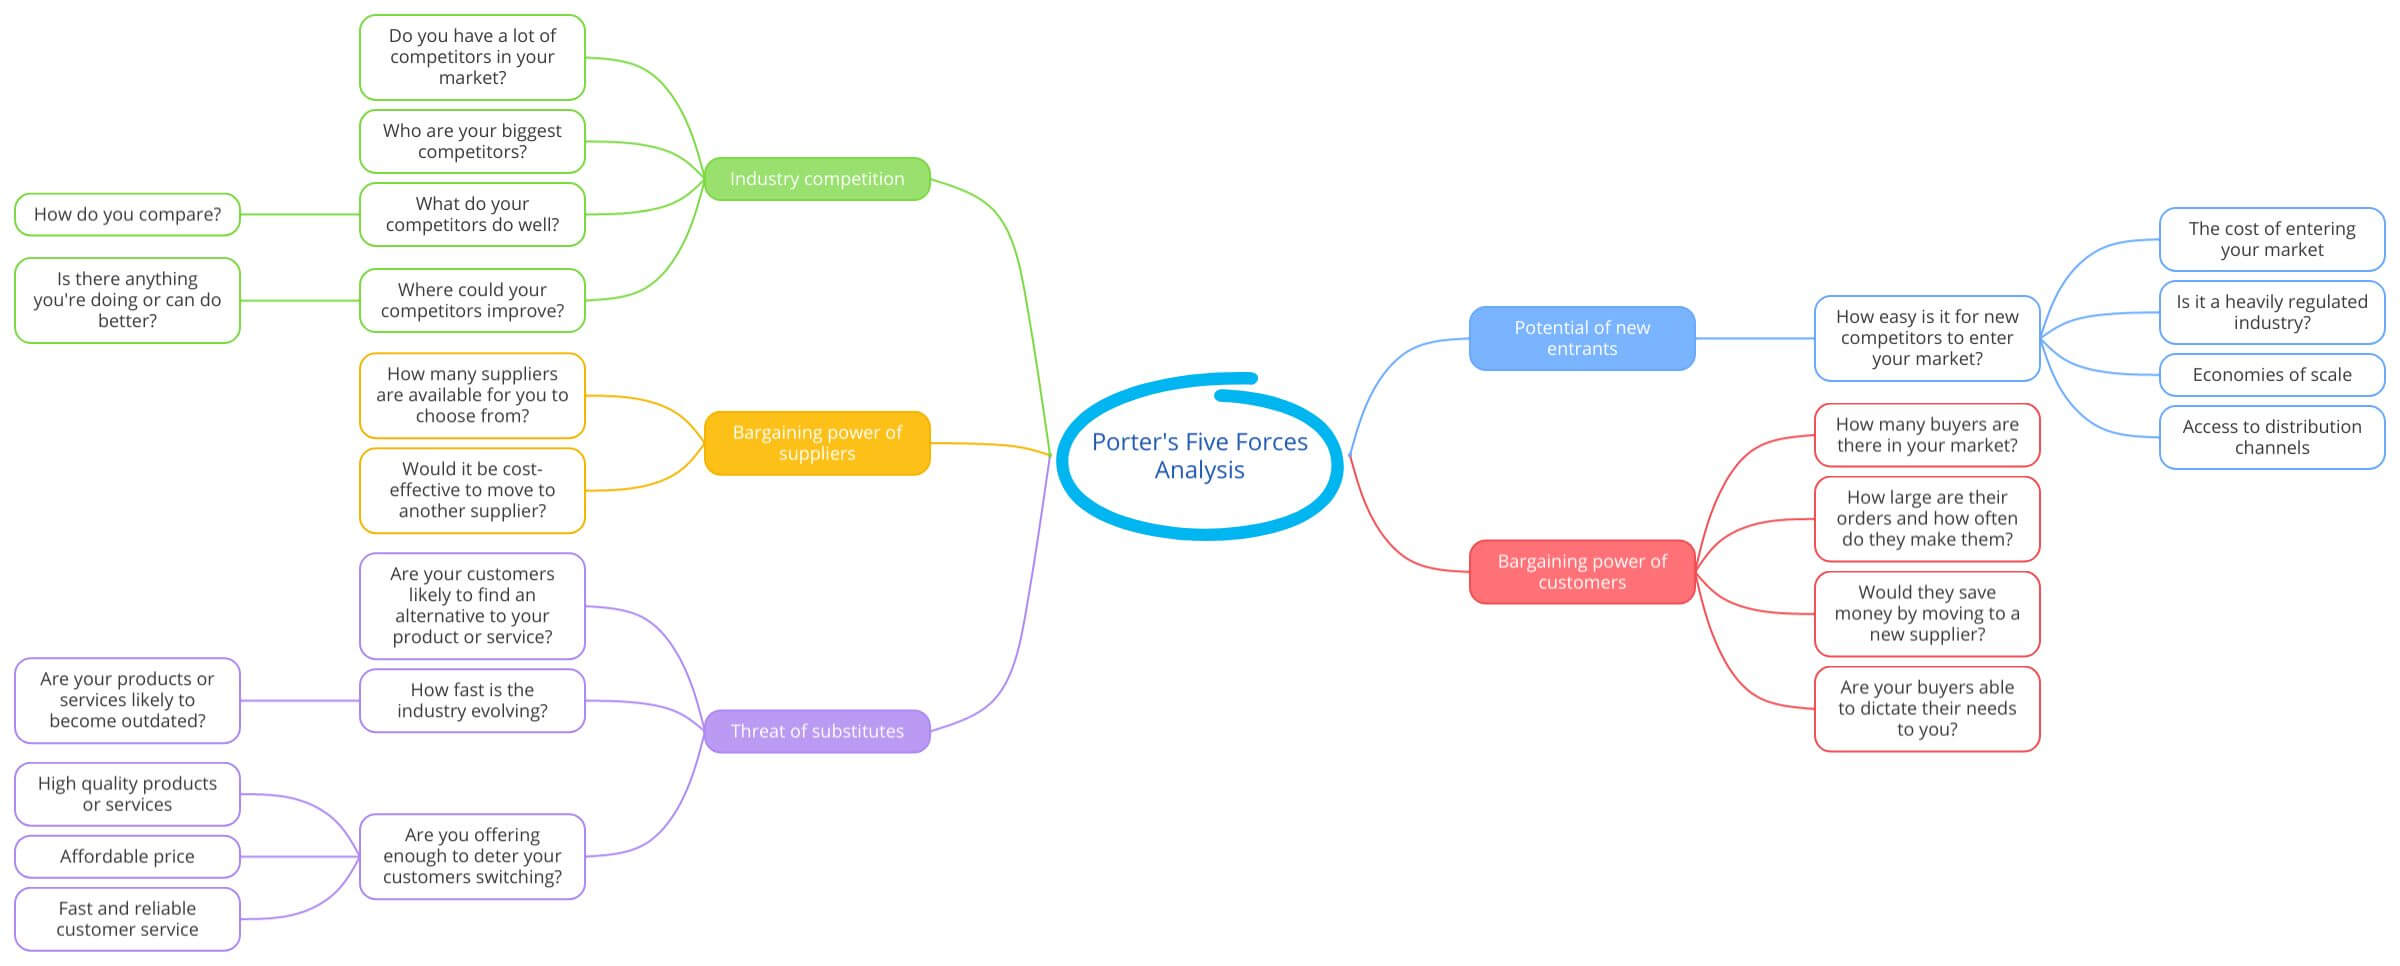 Five Forces Analysis example in a mind map